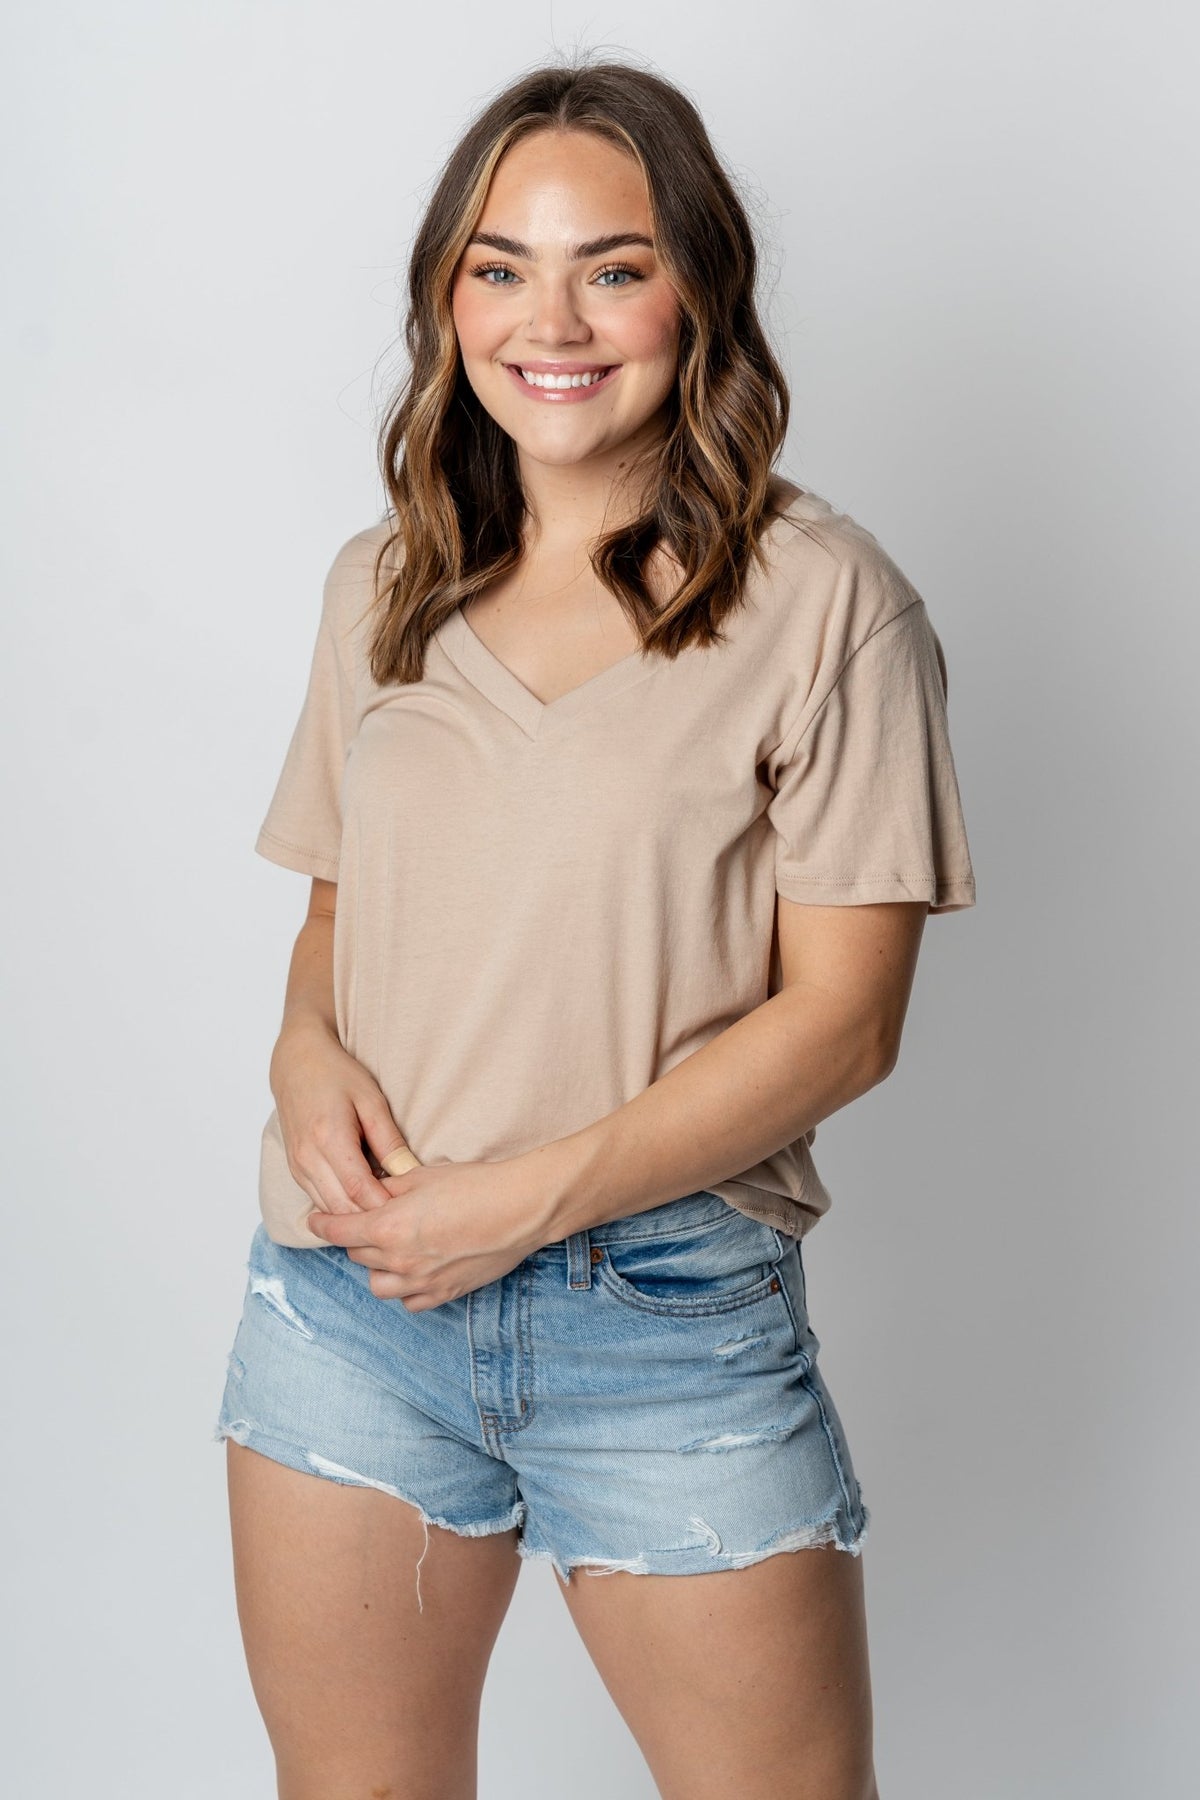 Z Supply girlfriend v-neck tee birch - Z Supply T-shirts - Z Supply Tops, Dresses, Tanks, Tees, Cardigans, Joggers and Loungewear at Lush Fashion Lounge